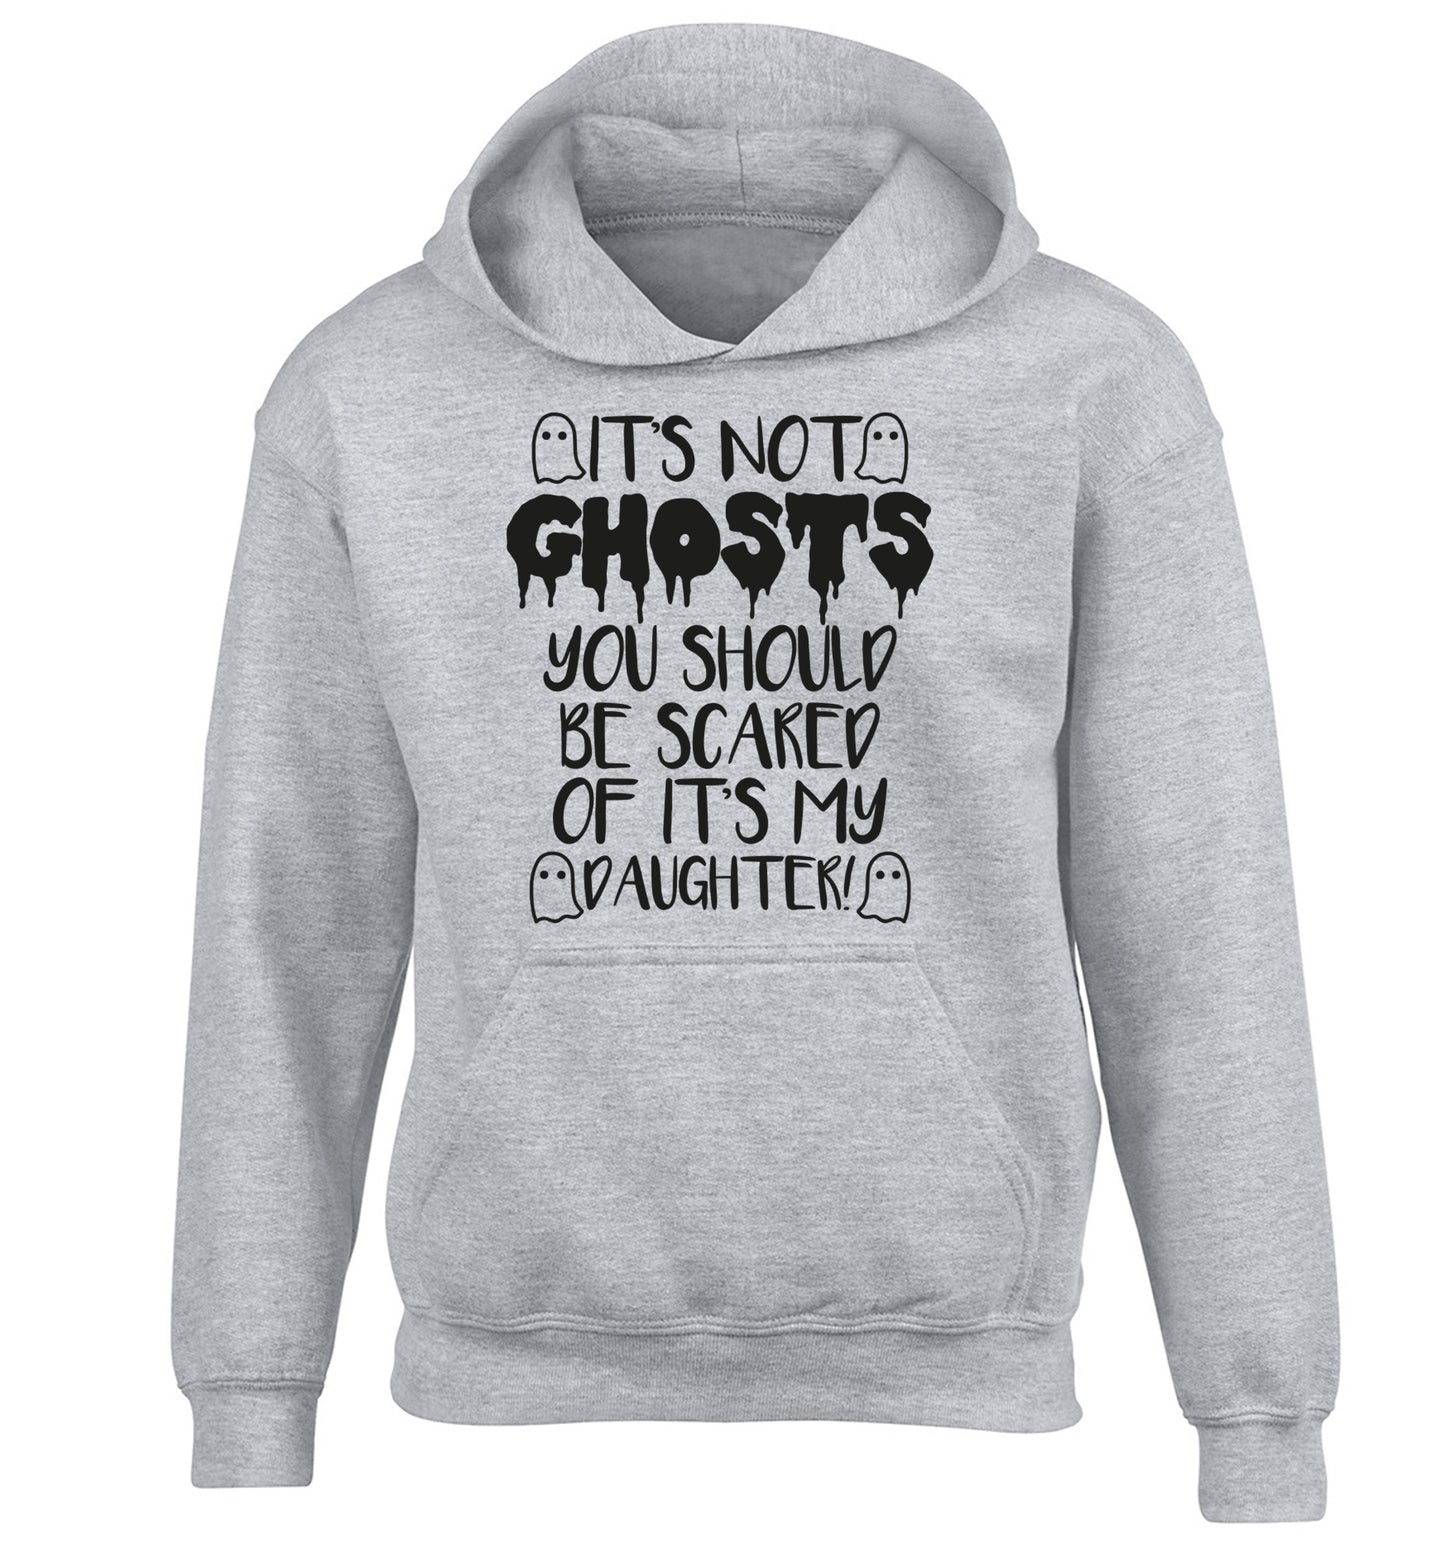 It's not ghosts you should be scared of it's my daughter! children's grey hoodie 12-14 Years